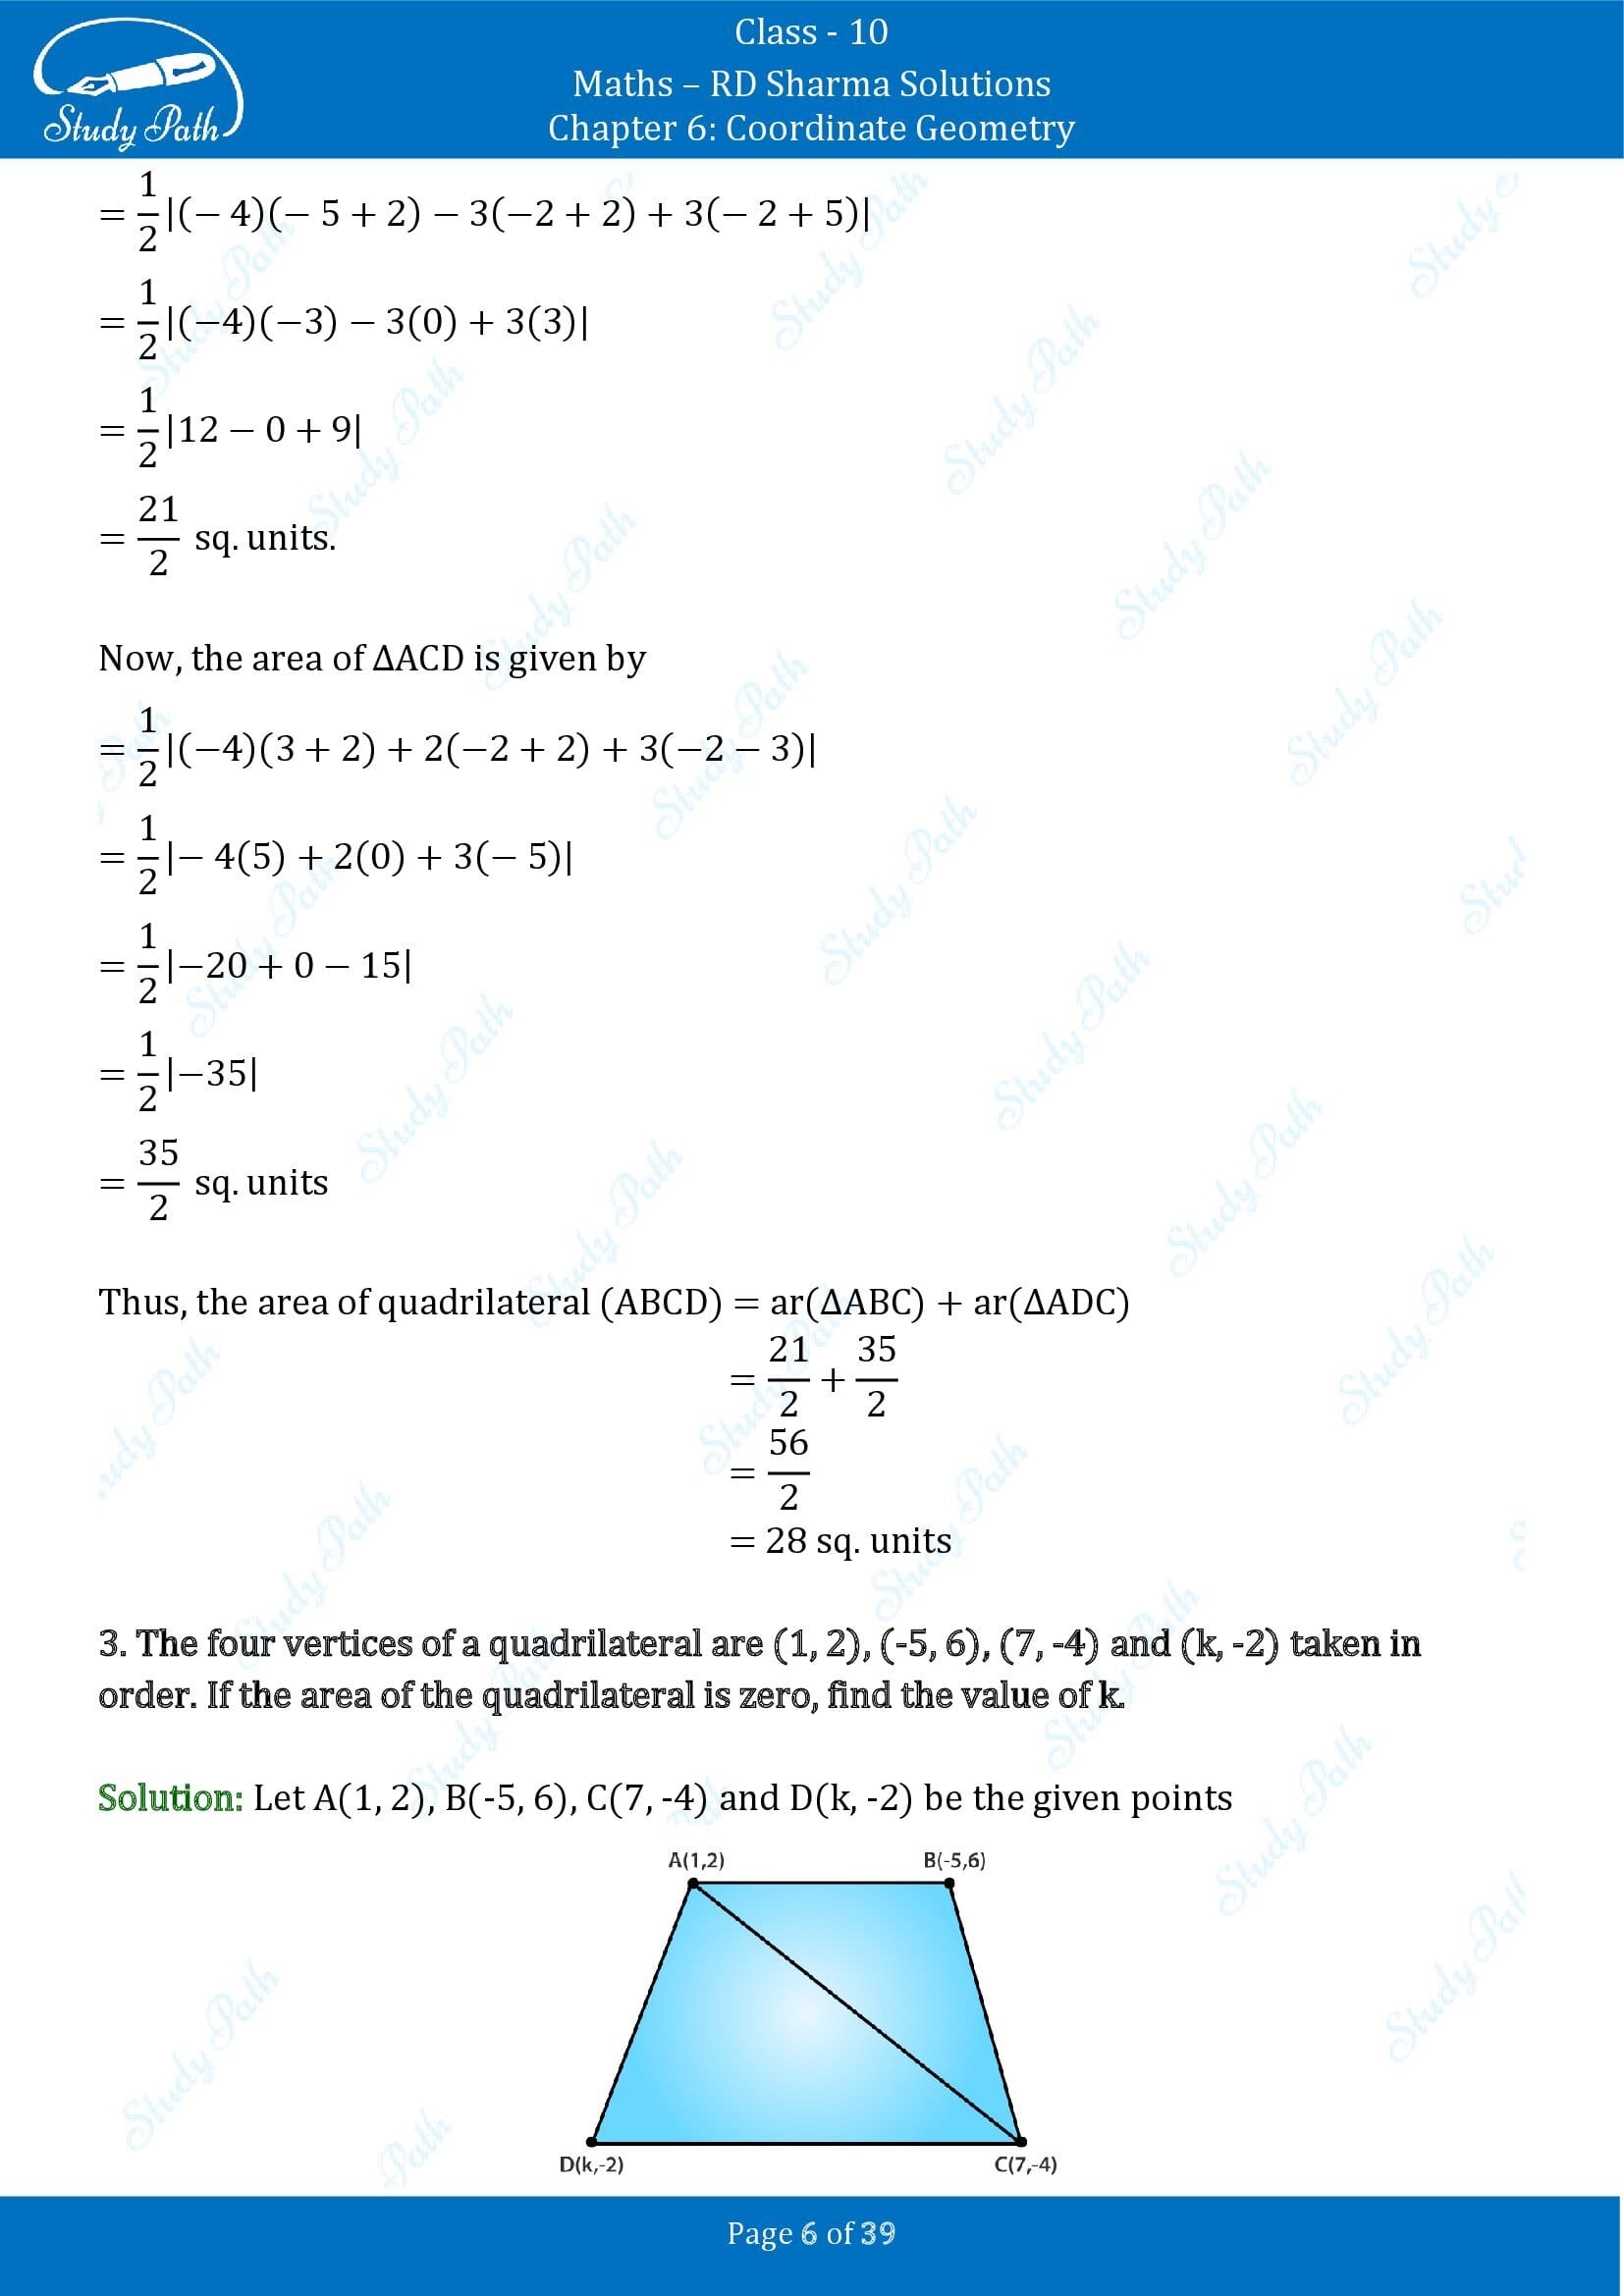 RD Sharma Solutions Class 10 Chapter 6 Coordinate Geometry Exercise 6.5 0006